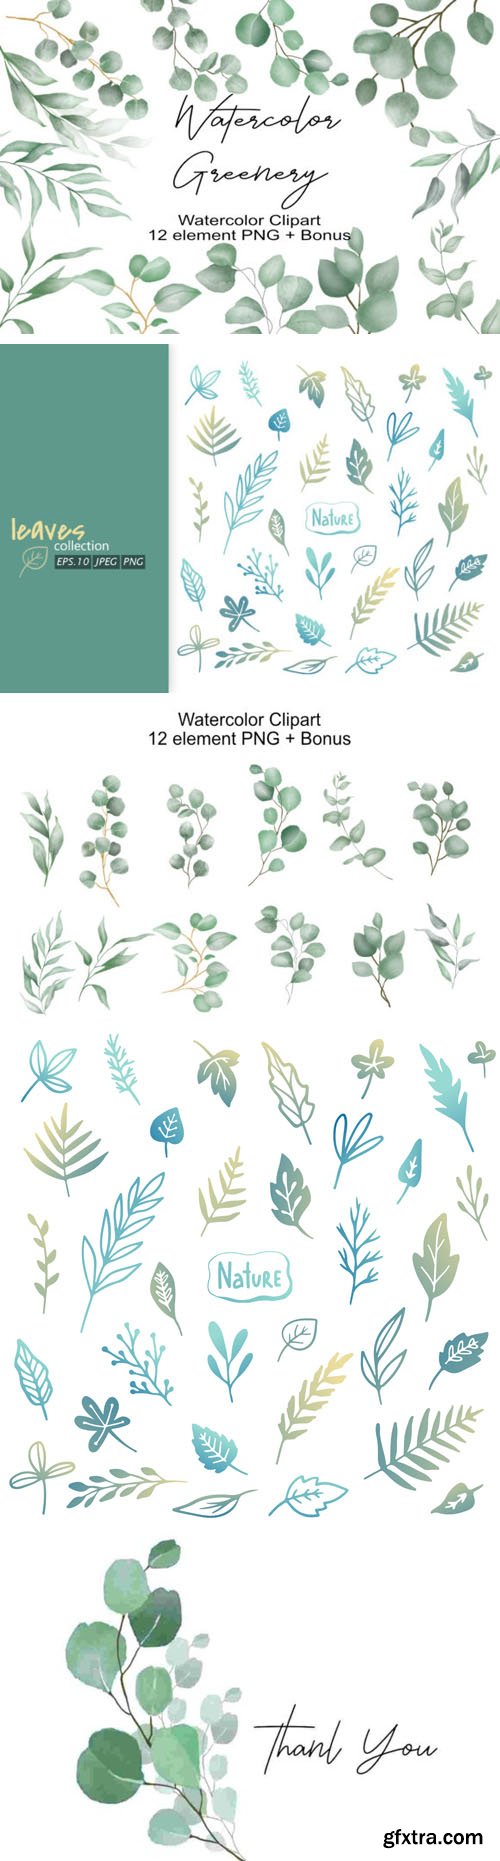 Watercolor Greenery Leaves - Vector Clipart Collection